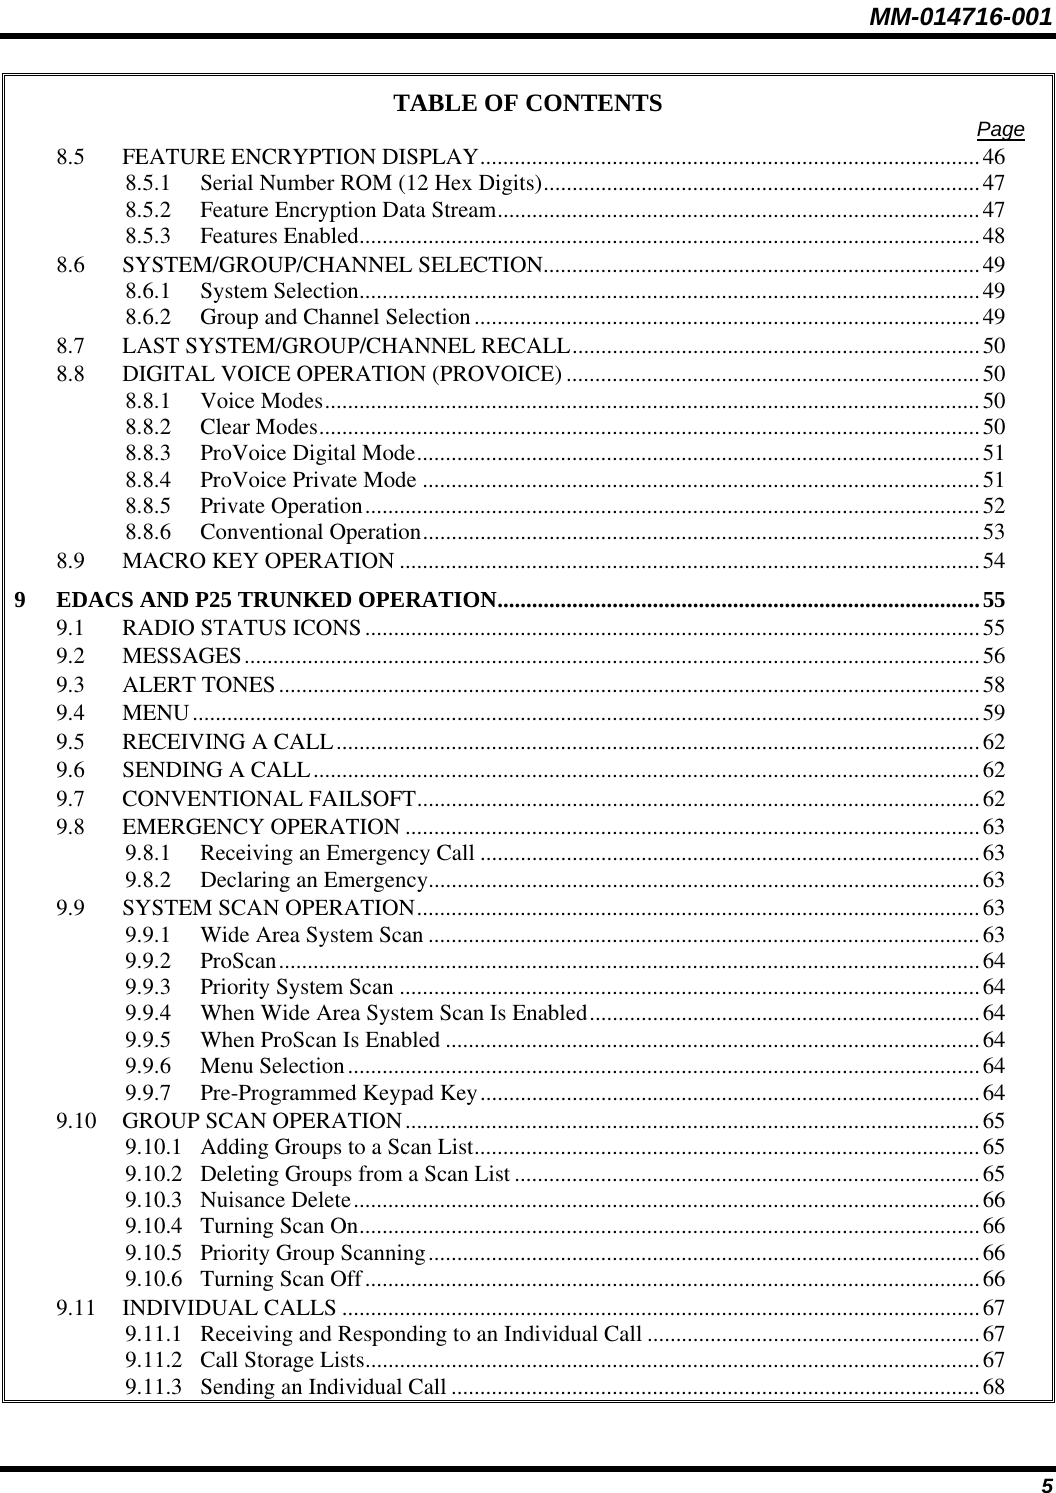 MM-014716-001 5 TABLE OF CONTENTS  Page 8.5 FEATURE ENCRYPTION DISPLAY.......................................................................................46 8.5.1 Serial Number ROM (12 Hex Digits)............................................................................47 8.5.2 Feature Encryption Data Stream....................................................................................47 8.5.3 Features Enabled............................................................................................................48 8.6 SYSTEM/GROUP/CHANNEL SELECTION............................................................................49 8.6.1 System Selection............................................................................................................49 8.6.2 Group and Channel Selection........................................................................................49 8.7 LAST SYSTEM/GROUP/CHANNEL RECALL.......................................................................50 8.8 DIGITAL VOICE OPERATION (PROVOICE) ........................................................................50 8.8.1 Voice Modes..................................................................................................................50 8.8.2 Clear Modes...................................................................................................................50 8.8.3 ProVoice Digital Mode..................................................................................................51 8.8.4 ProVoice Private Mode .................................................................................................51 8.8.5 Private Operation...........................................................................................................52 8.8.6 Conventional Operation.................................................................................................53 8.9 MACRO KEY OPERATION .....................................................................................................54 9 EDACS AND P25 TRUNKED OPERATION....................................................................................55 9.1 RADIO STATUS ICONS...........................................................................................................55 9.2 MESSAGES................................................................................................................................56 9.3 ALERT TONES..........................................................................................................................58 9.4 MENU.........................................................................................................................................59 9.5 RECEIVING A CALL................................................................................................................62 9.6 SENDING A CALL....................................................................................................................62 9.7 CONVENTIONAL FAILSOFT..................................................................................................62 9.8 EMERGENCY OPERATION ....................................................................................................63 9.8.1 Receiving an Emergency Call .......................................................................................63 9.8.2 Declaring an Emergency................................................................................................63 9.9 SYSTEM SCAN OPERATION..................................................................................................63 9.9.1 Wide Area System Scan ................................................................................................63 9.9.2 ProScan..........................................................................................................................64 9.9.3 Priority System Scan .....................................................................................................64 9.9.4 When Wide Area System Scan Is Enabled....................................................................64 9.9.5 When ProScan Is Enabled .............................................................................................64 9.9.6 Menu Selection..............................................................................................................64 9.9.7 Pre-Programmed Keypad Key.......................................................................................64 9.10 GROUP SCAN OPERATION....................................................................................................65 9.10.1 Adding Groups to a Scan List........................................................................................65 9.10.2 Deleting Groups from a Scan List .................................................................................65 9.10.3 Nuisance Delete.............................................................................................................66 9.10.4 Turning Scan On............................................................................................................66 9.10.5 Priority Group Scanning................................................................................................66 9.10.6 Turning Scan Off...........................................................................................................66 9.11 INDIVIDUAL CALLS ...............................................................................................................67 9.11.1 Receiving and Responding to an Individual Call ..........................................................67 9.11.2 Call Storage Lists...........................................................................................................67 9.11.3 Sending an Individual Call ............................................................................................68 